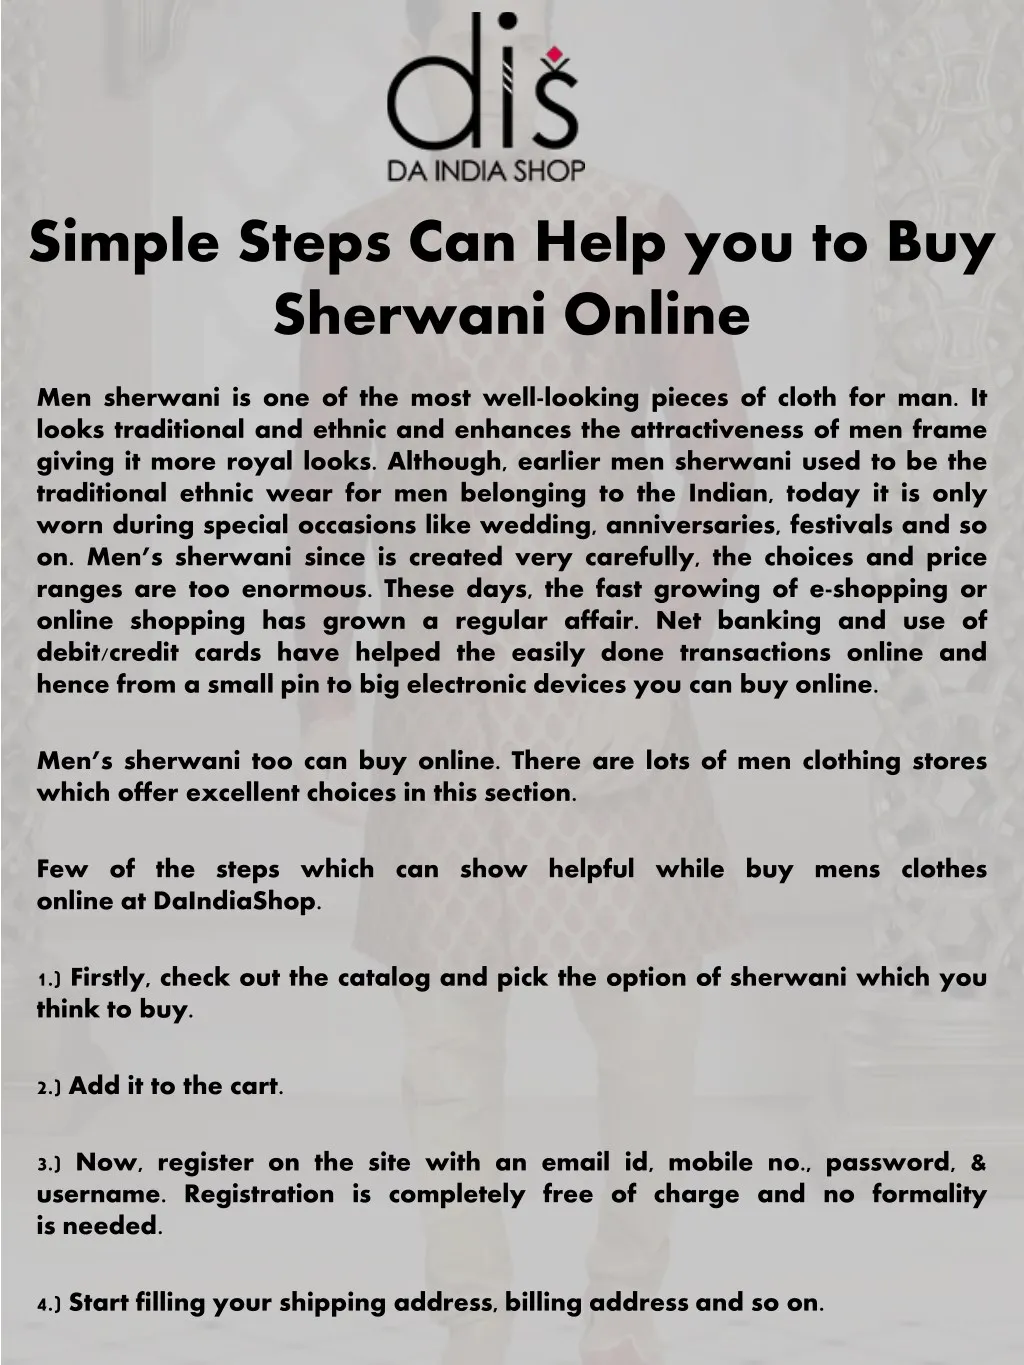 simple steps can help you to buy sherwani online